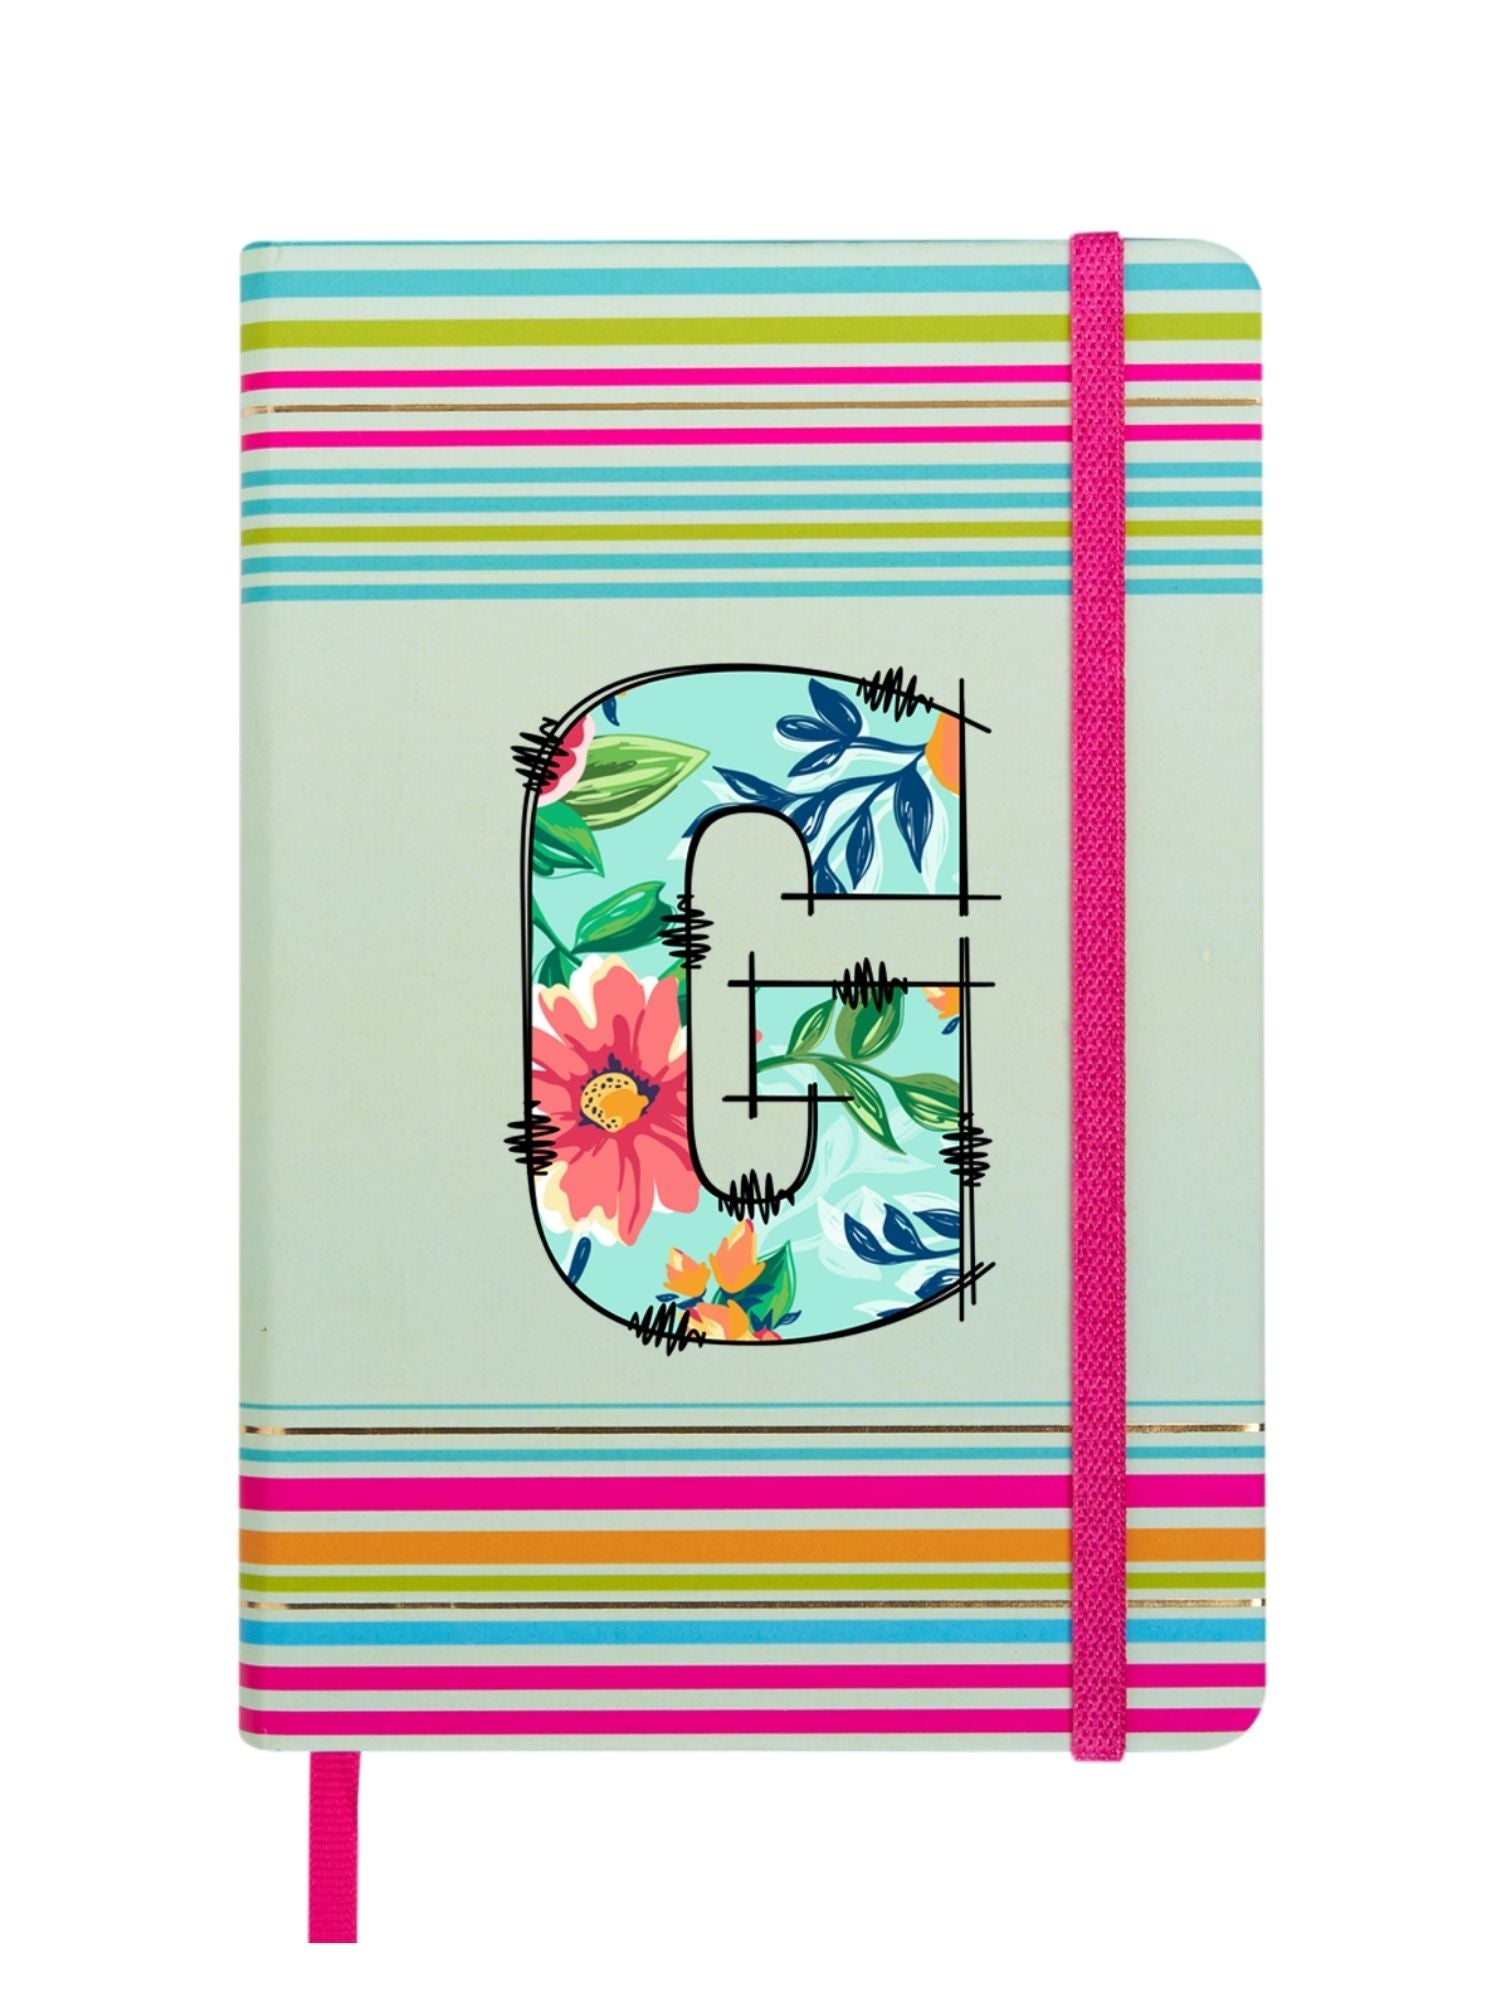 Doodle Initial G Stripes Theme Premium Hard Bound B6 Notebook Diary